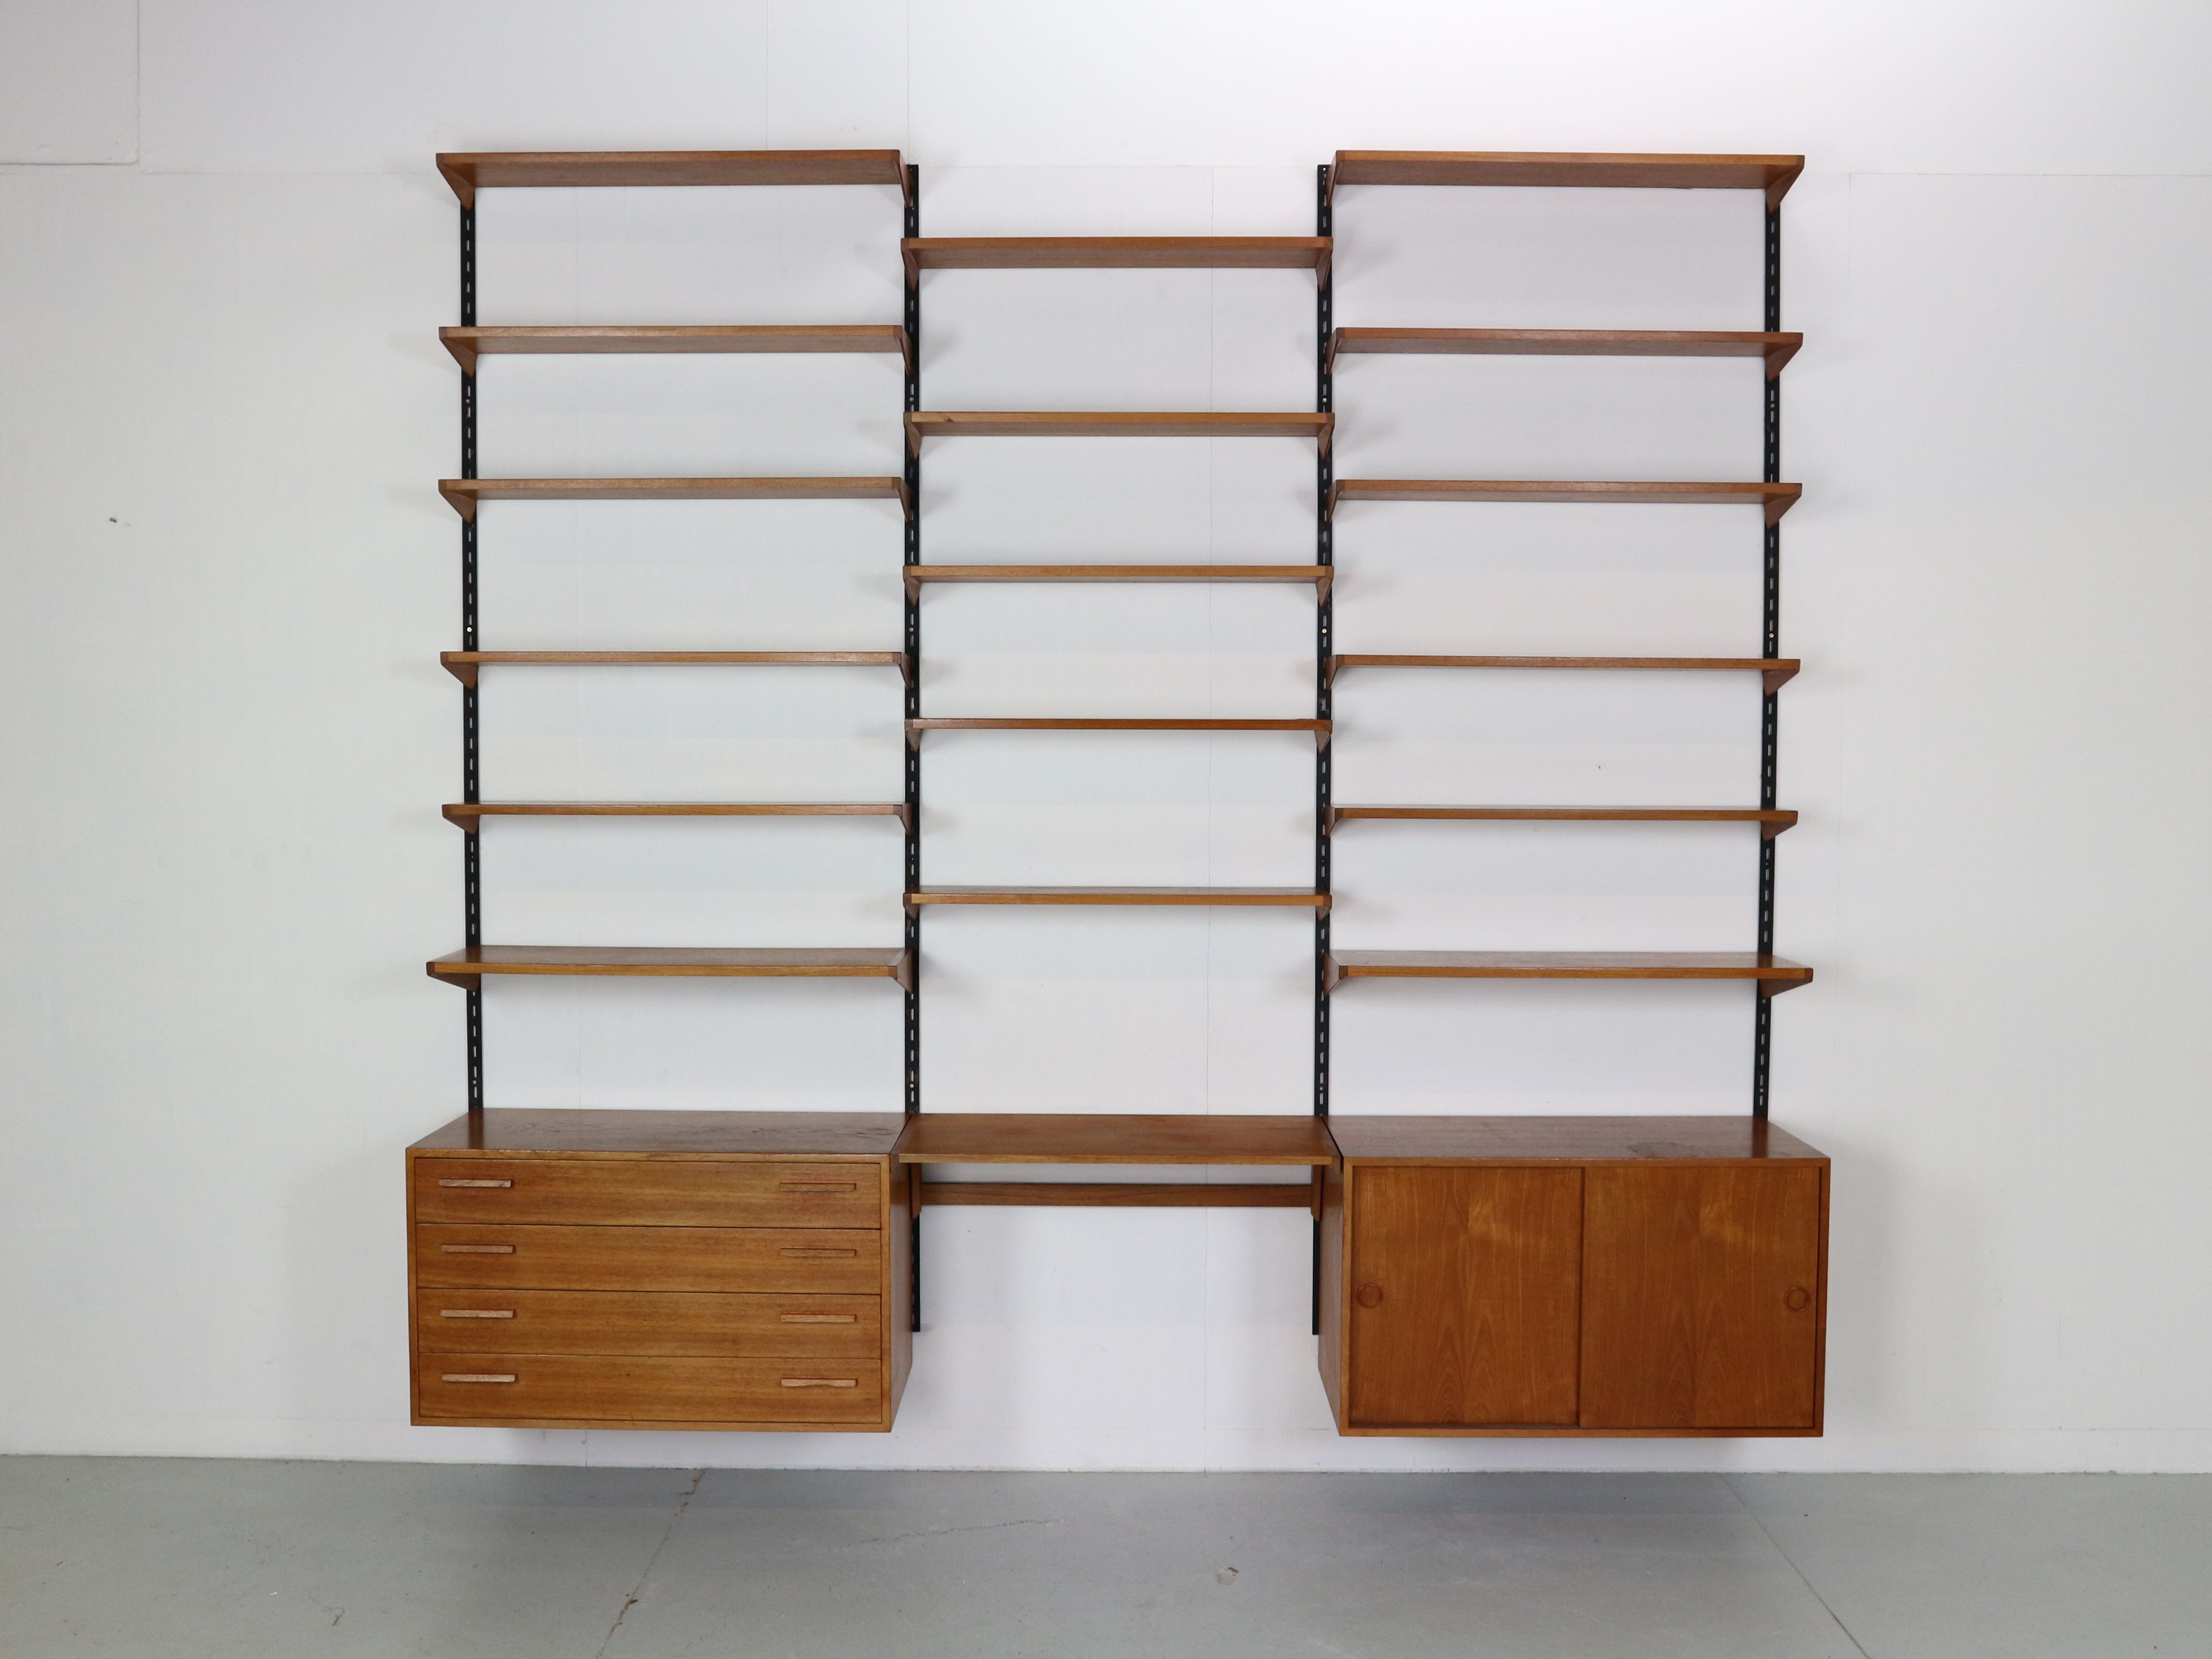 Mid Century modern period famous danish furniture designer Kai Kristiansen design this gorgeous and very practical wall unit shelving system.
It was manufactured by Feldballes Møbelfabrik in 1960's period, Denmark.

The shelves and the cabinets